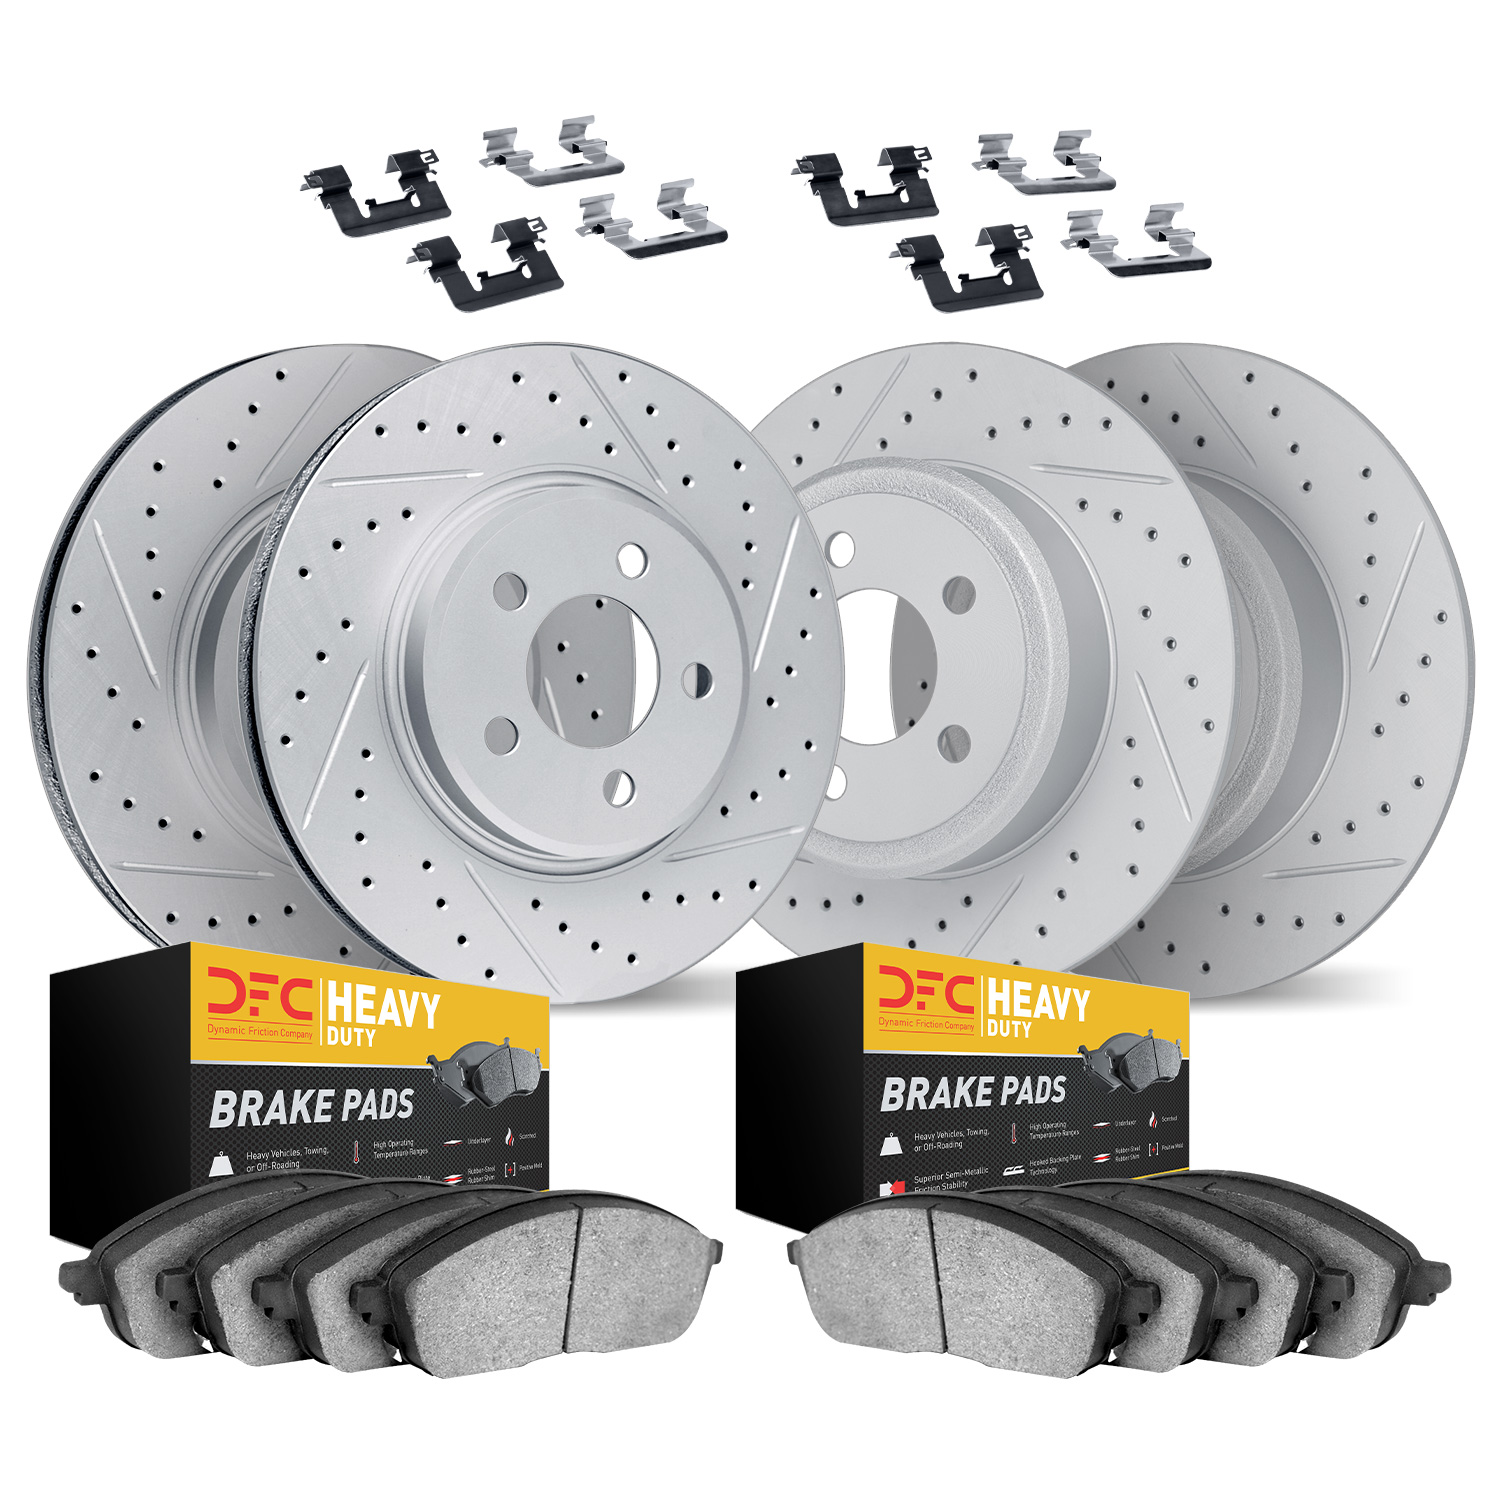 2214-55003 Geoperformance Drilled/Slotted Rotors w/Heavy-Duty Pads Kit & Hardware, 2003-2011 Ford/Lincoln/Mercury/Mazda, Positio